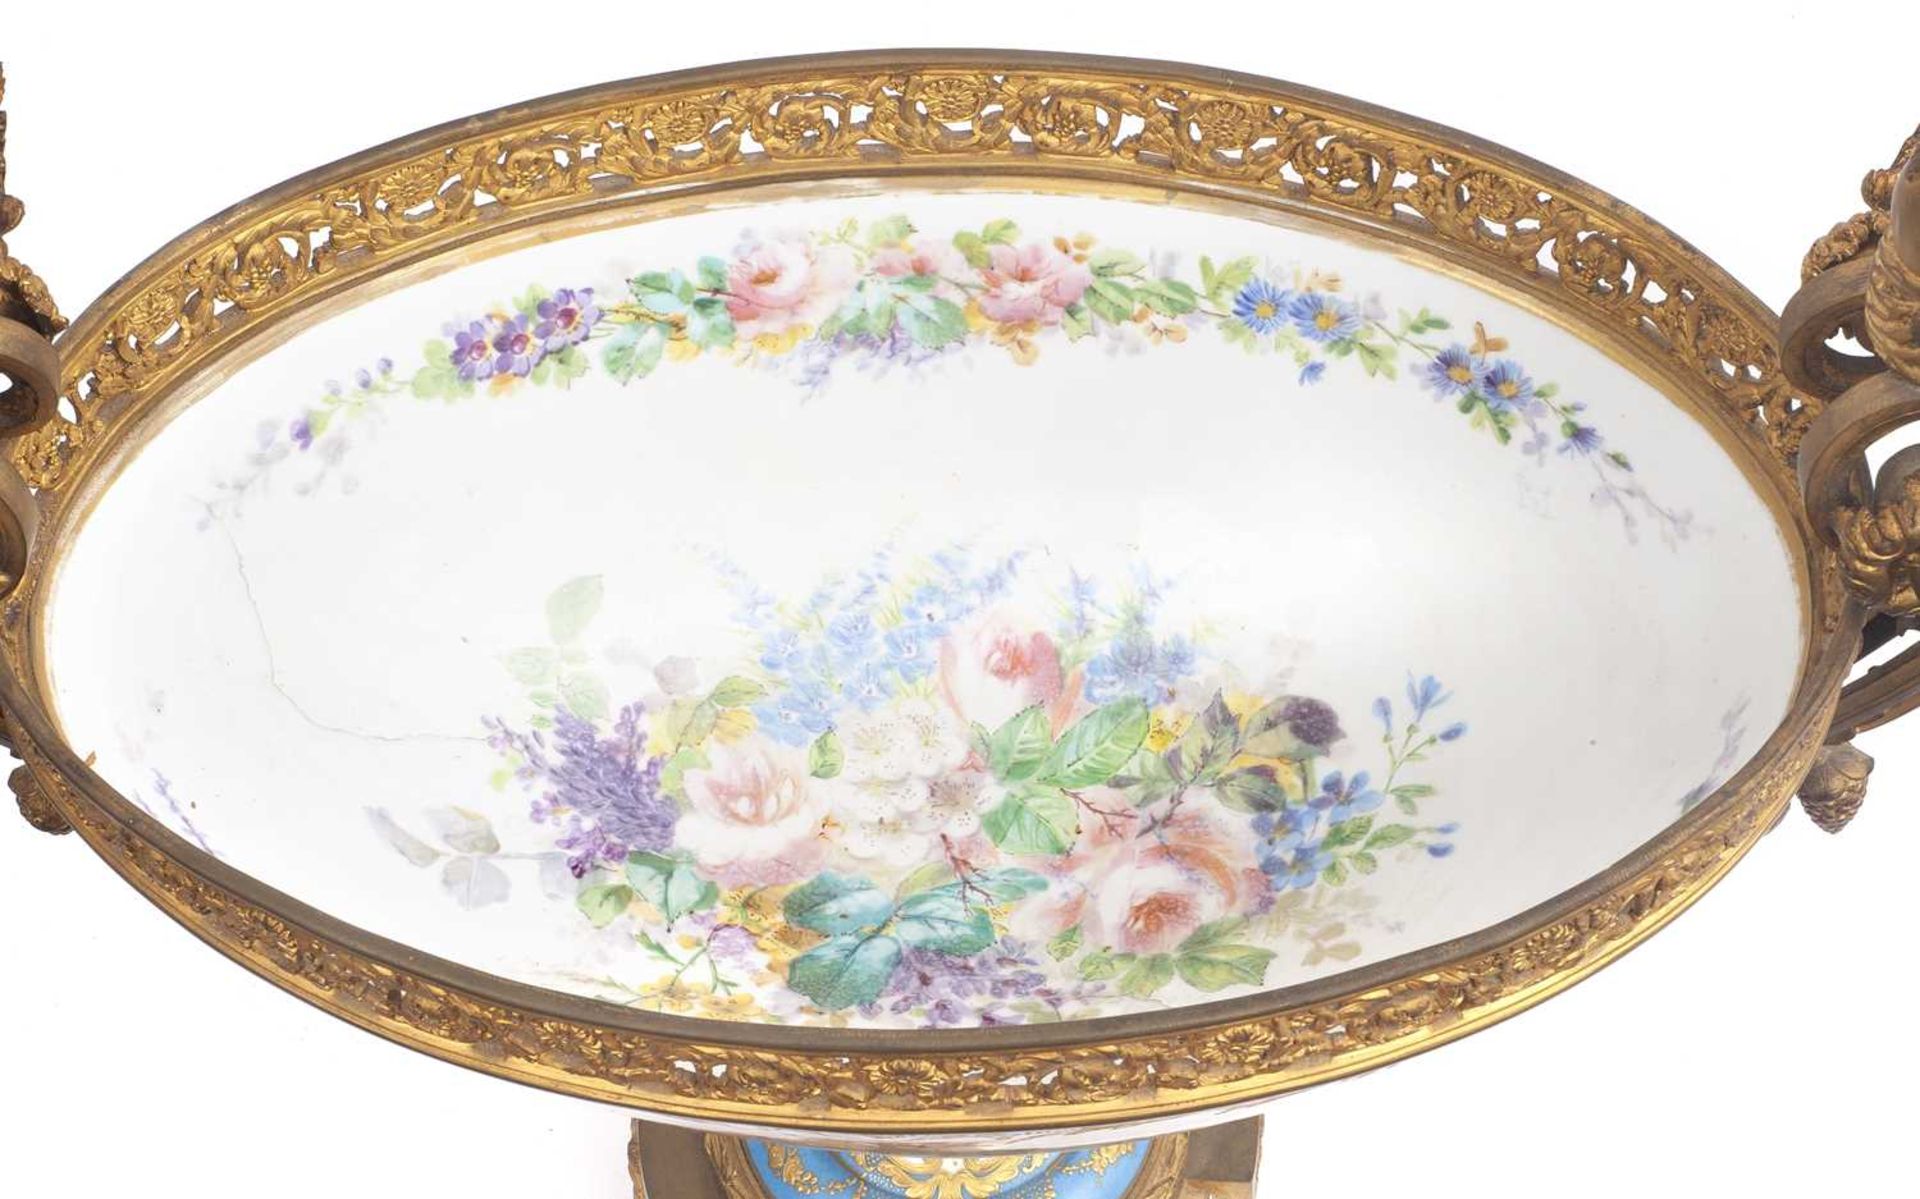 A VERY LARGE LATE 19TH CENTURY FRENCH SEVRES STYLE PORCELAIN AND ORMOLU MOUNTED JARDINIERE - Bild 3 aus 4